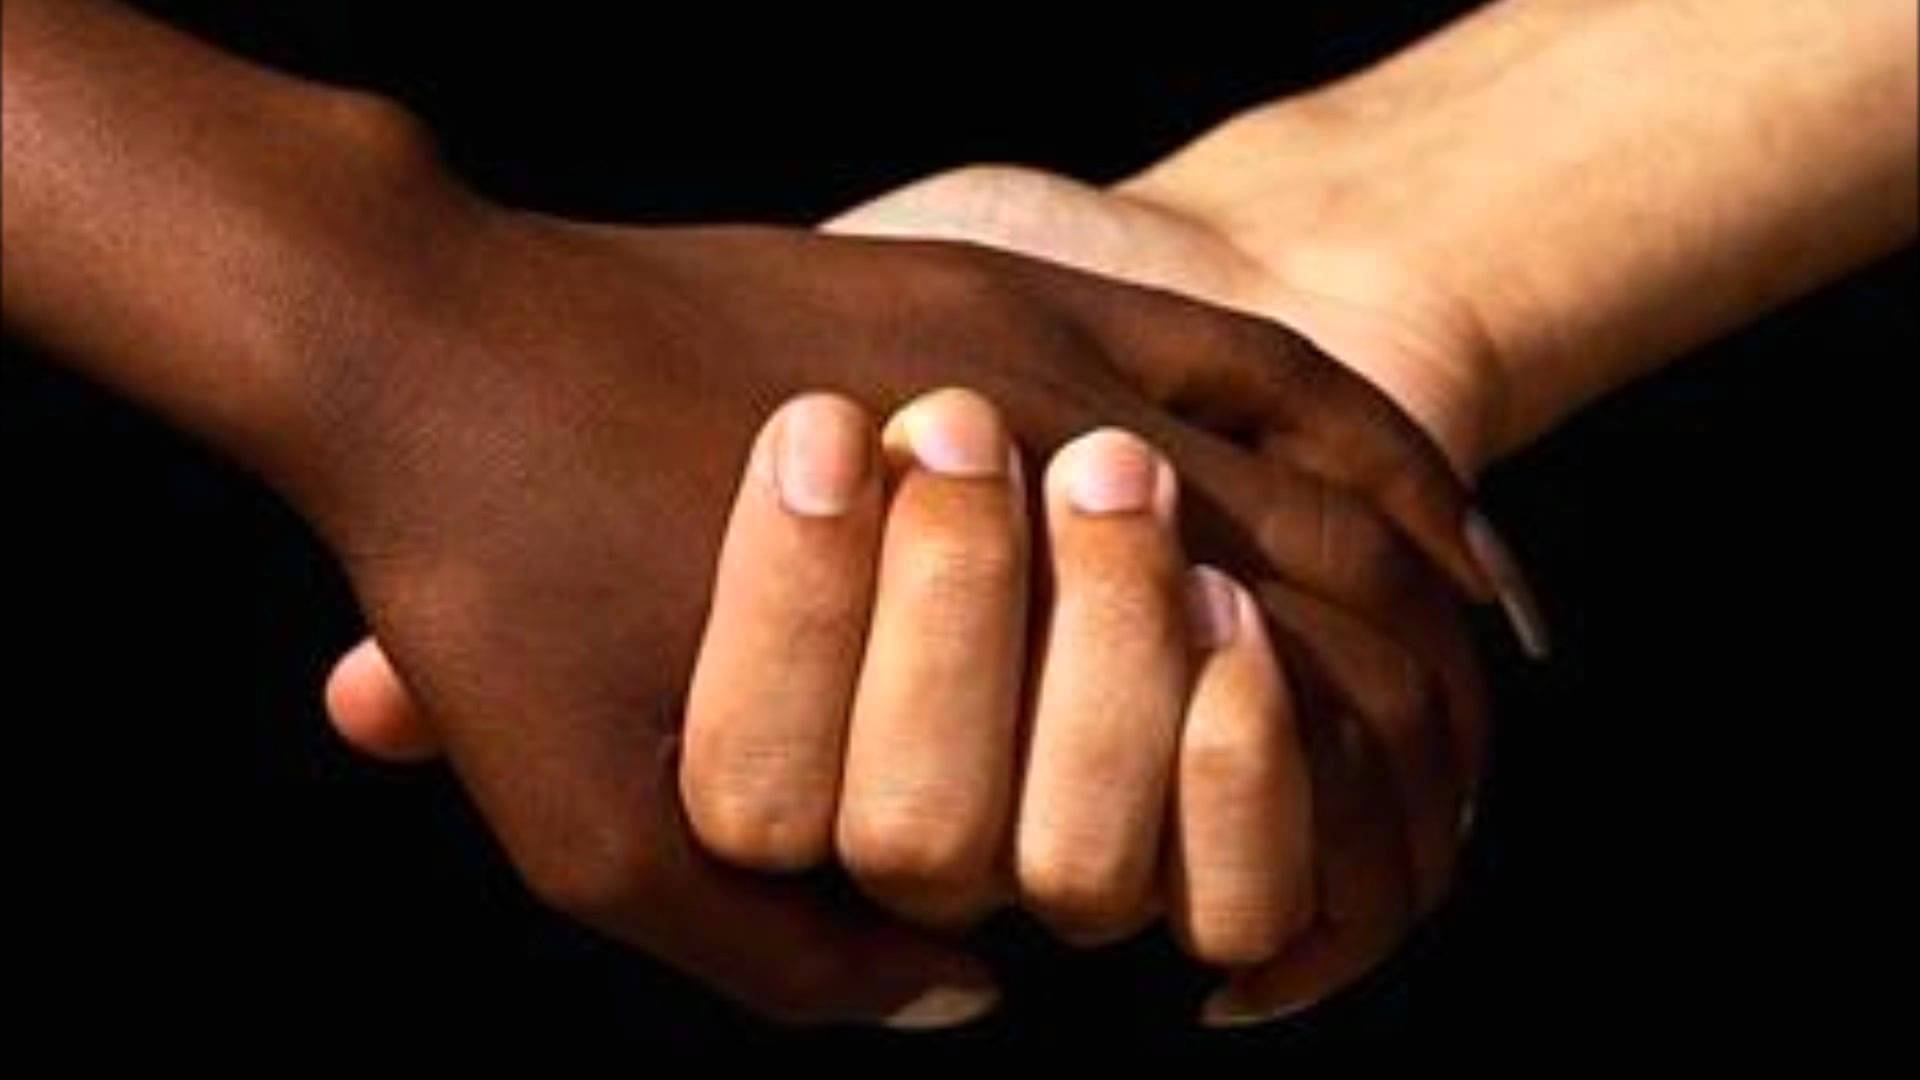 Interracial Dating Looking For Love In All The White Places